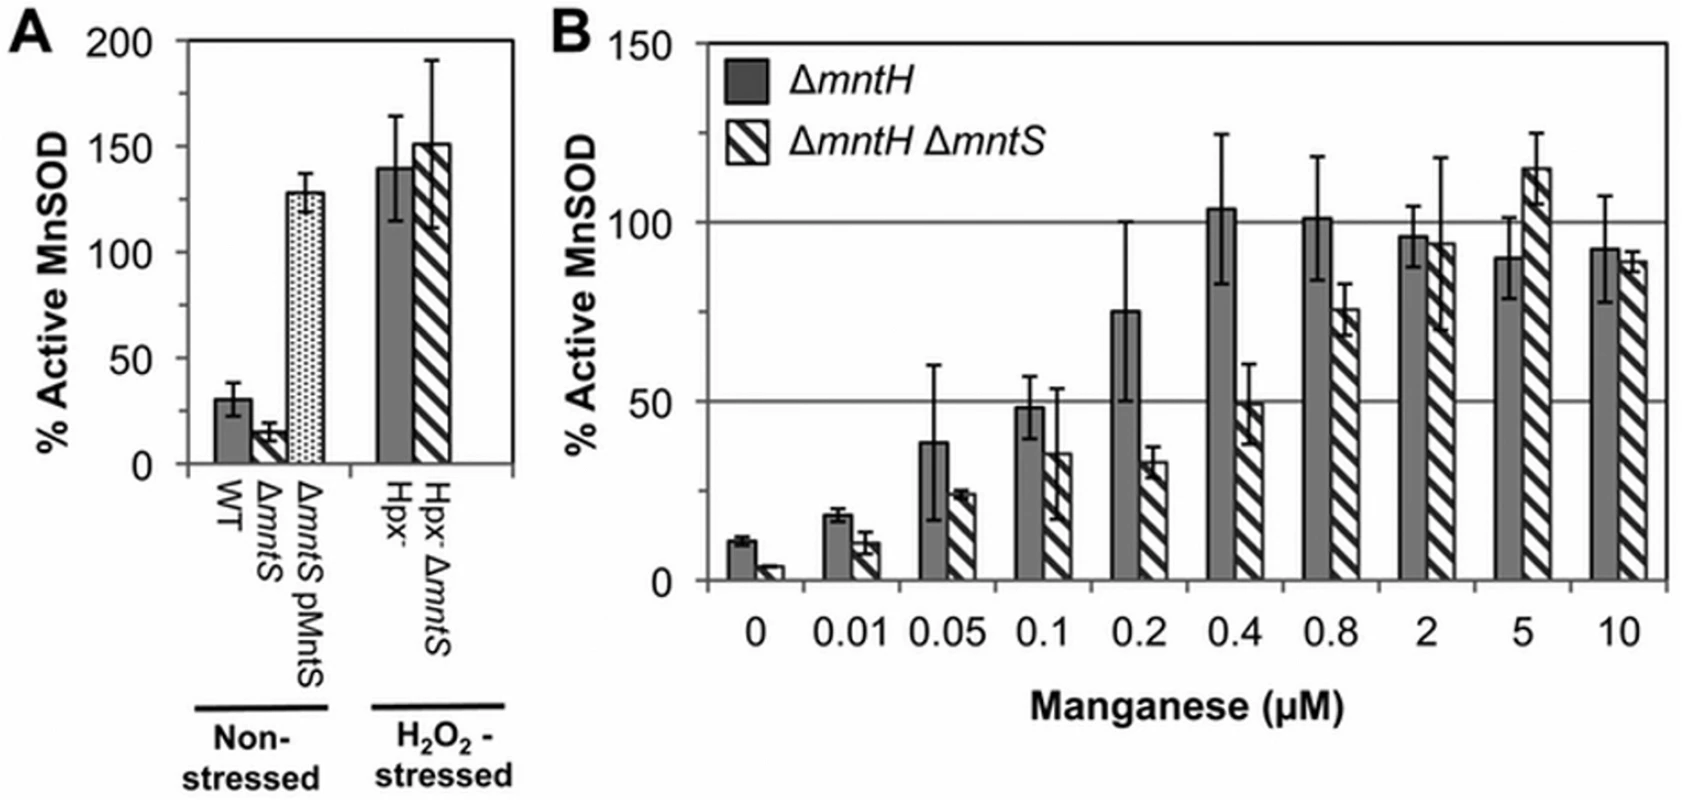 MntS facilitates the activation of manganese-dependent superoxide dismutase.